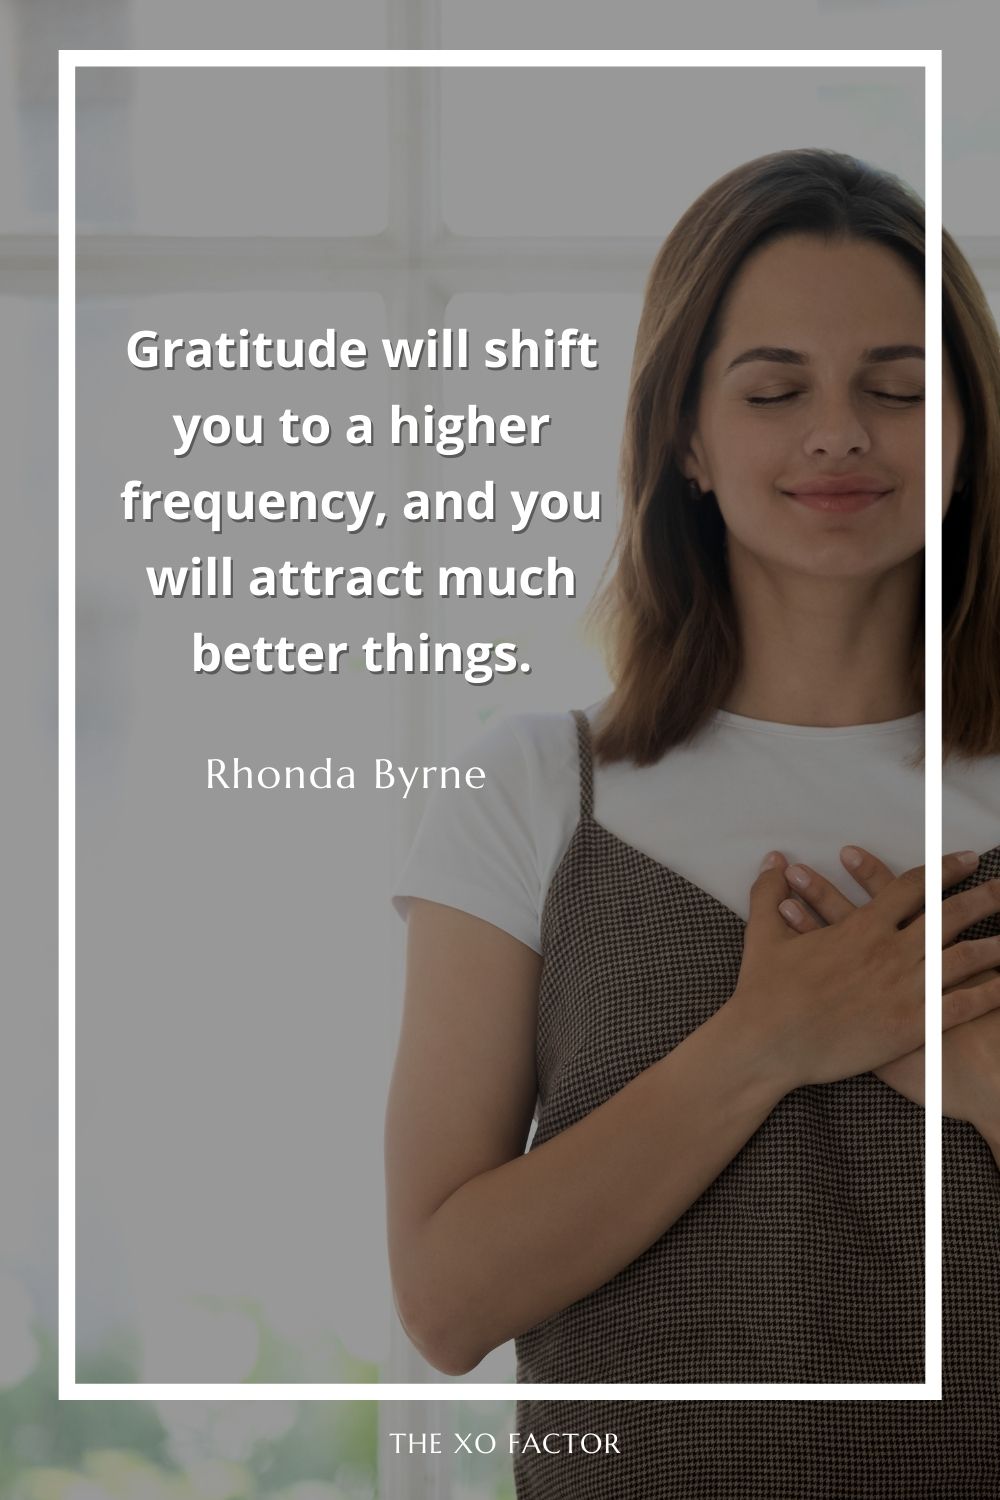 Gratitude will shift you to a higher frequency, and you will attract much better things.